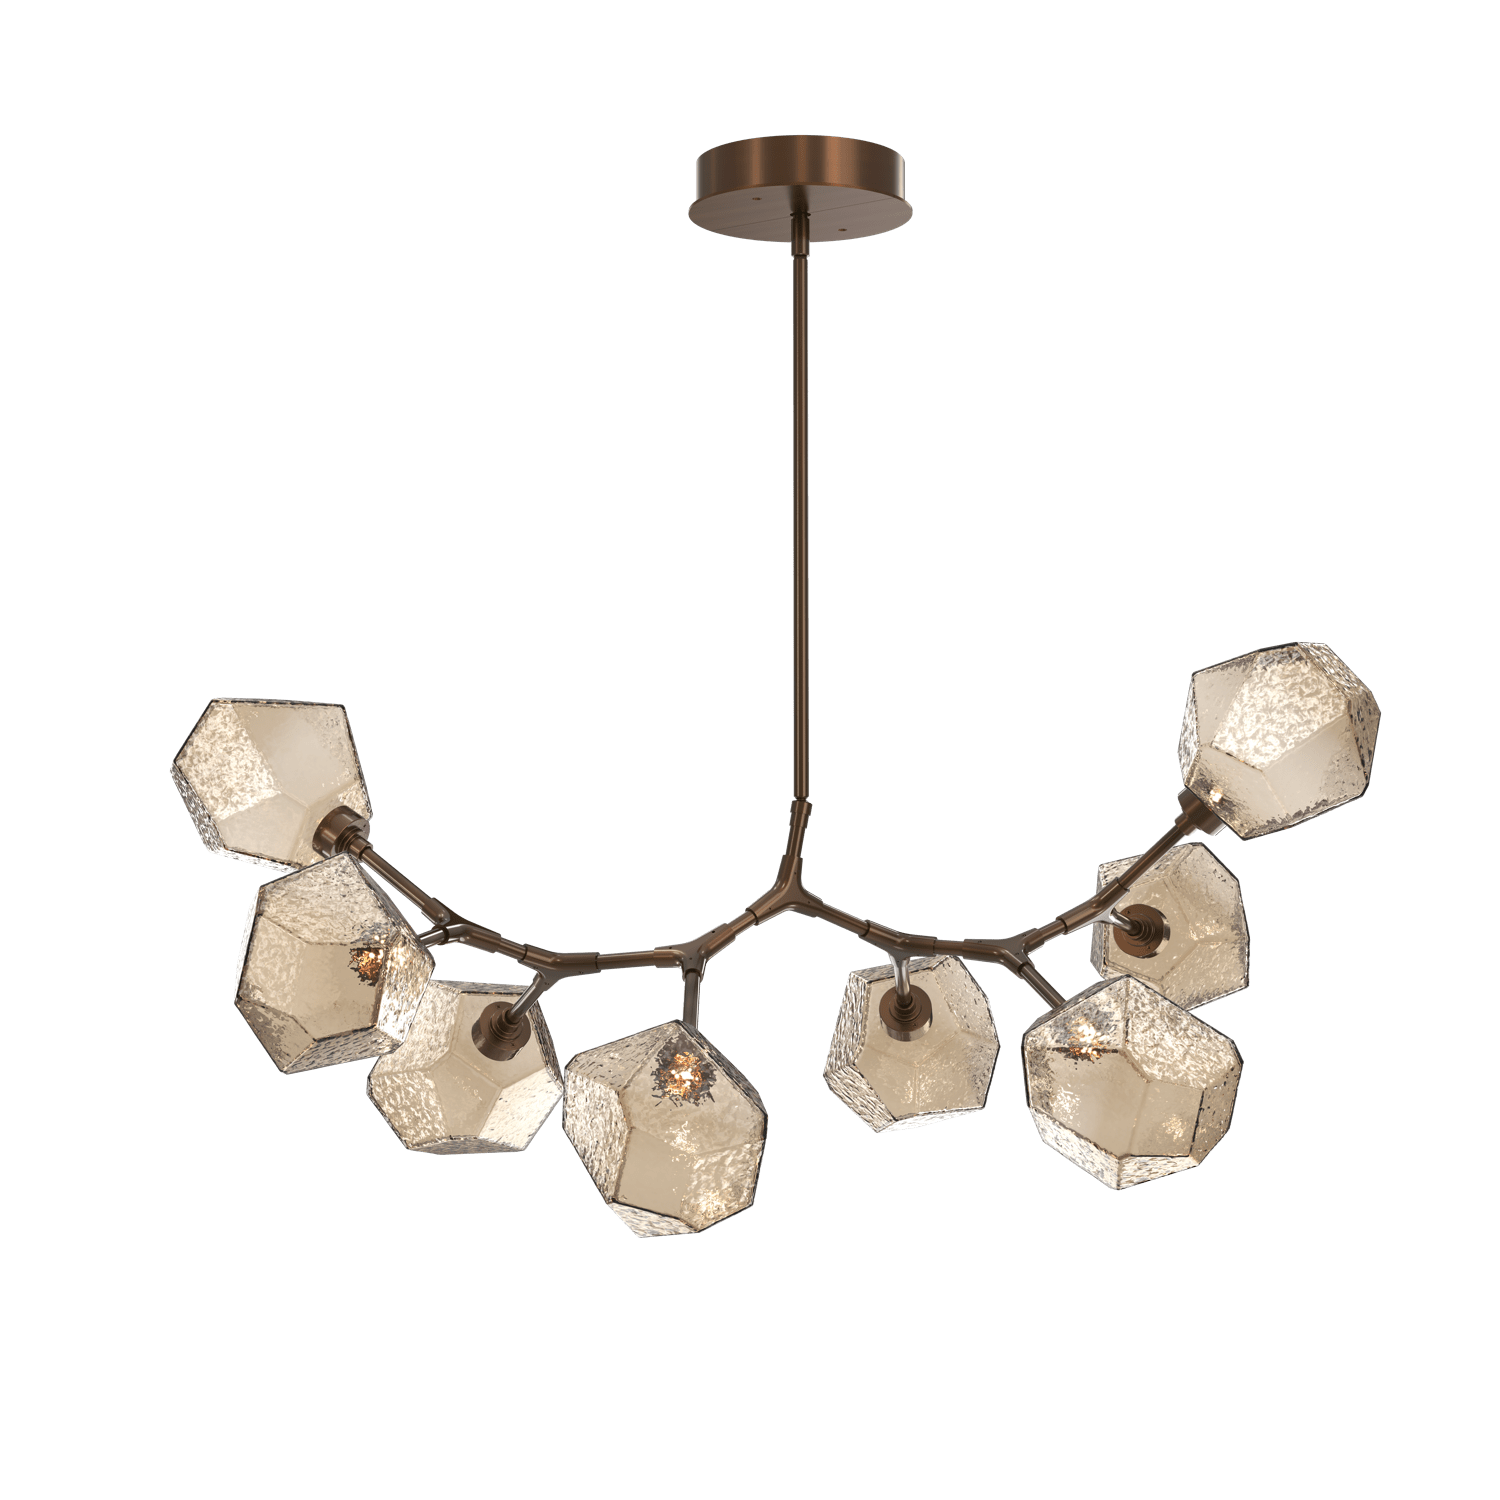 PLB0039-BB-RB-B-Hammerton-Studio-Gem-8-light-modern-branch-chandelier-with-oil-rubbed-bronze-finish-and-bronze-blown-glass-shades-and-LED-lamping